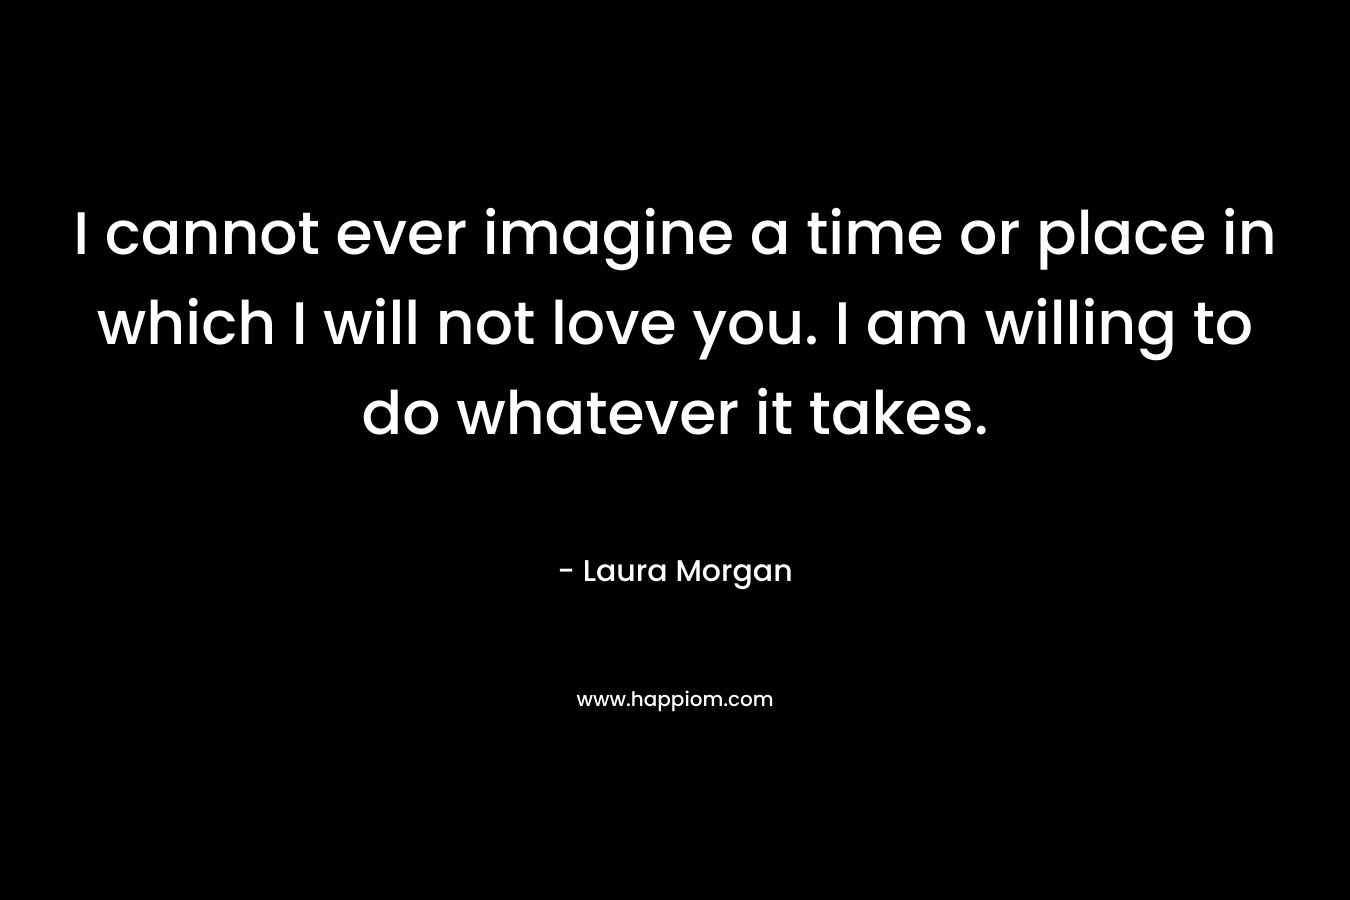 I cannot ever imagine a time or place in which I will not love you. I am willing to do whatever it takes.